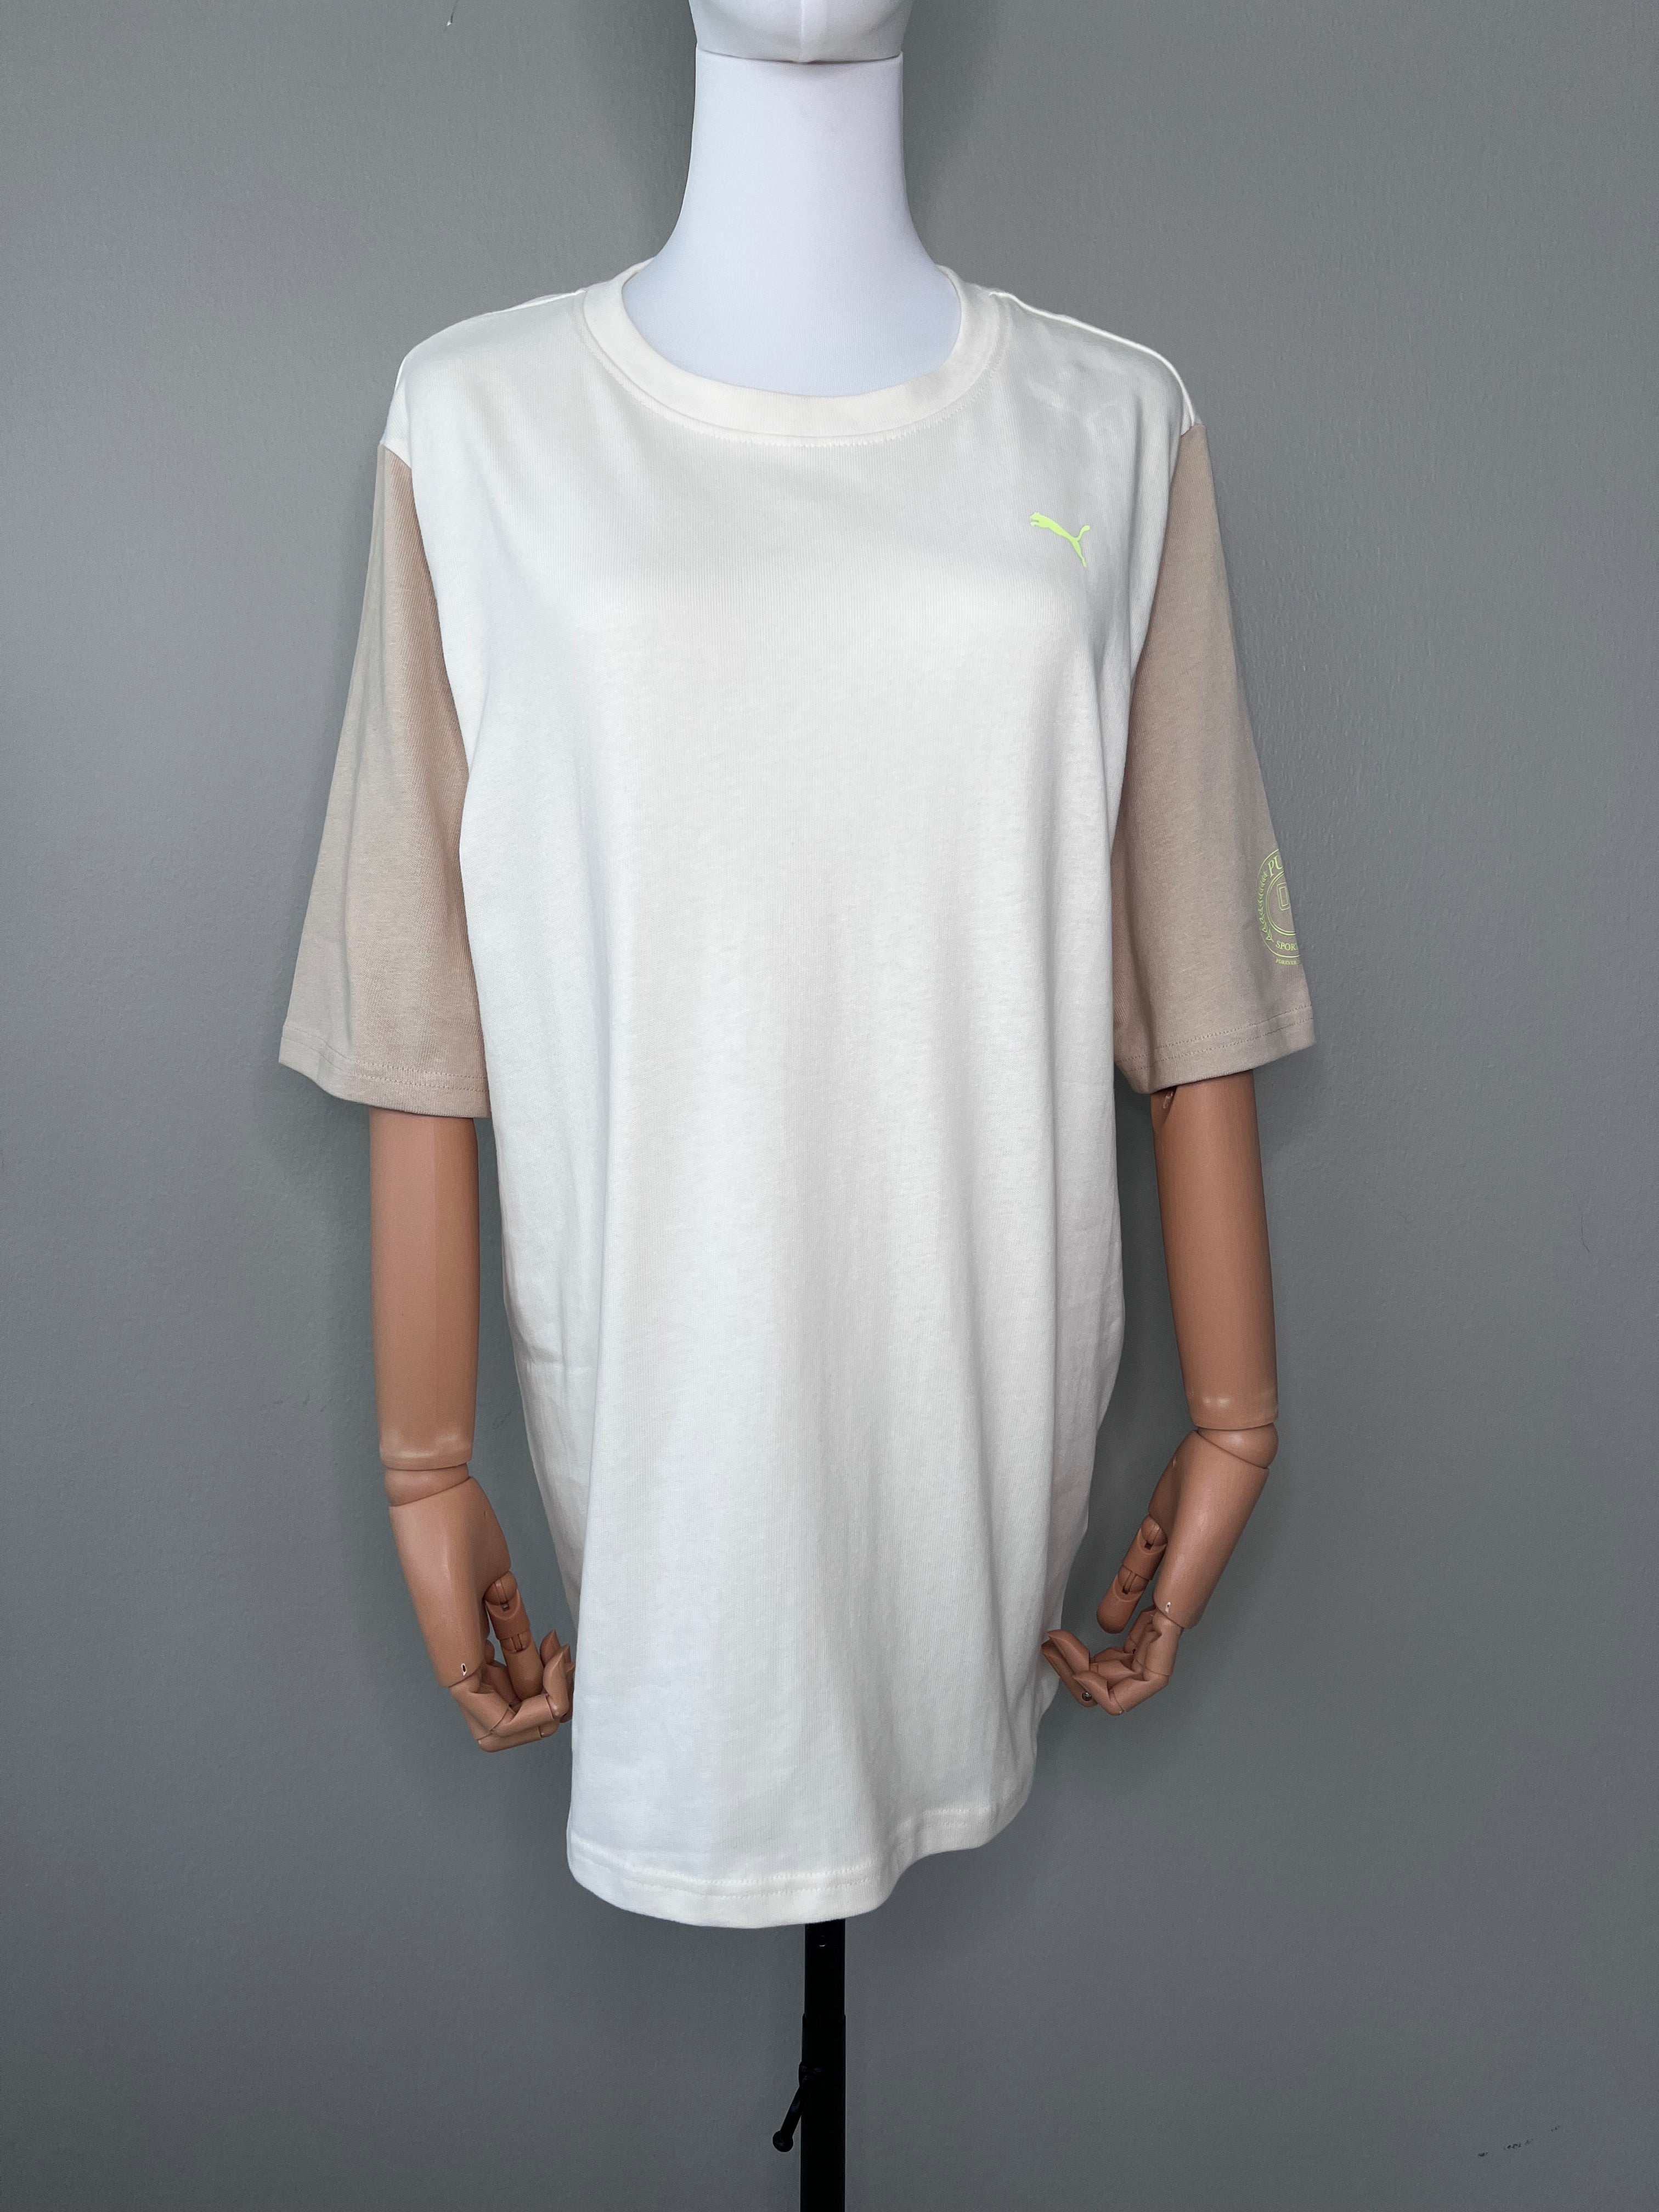 BRAND NEW ! Frosted Ivory-Granola Color Over Sized Unisex Tee - PUMA